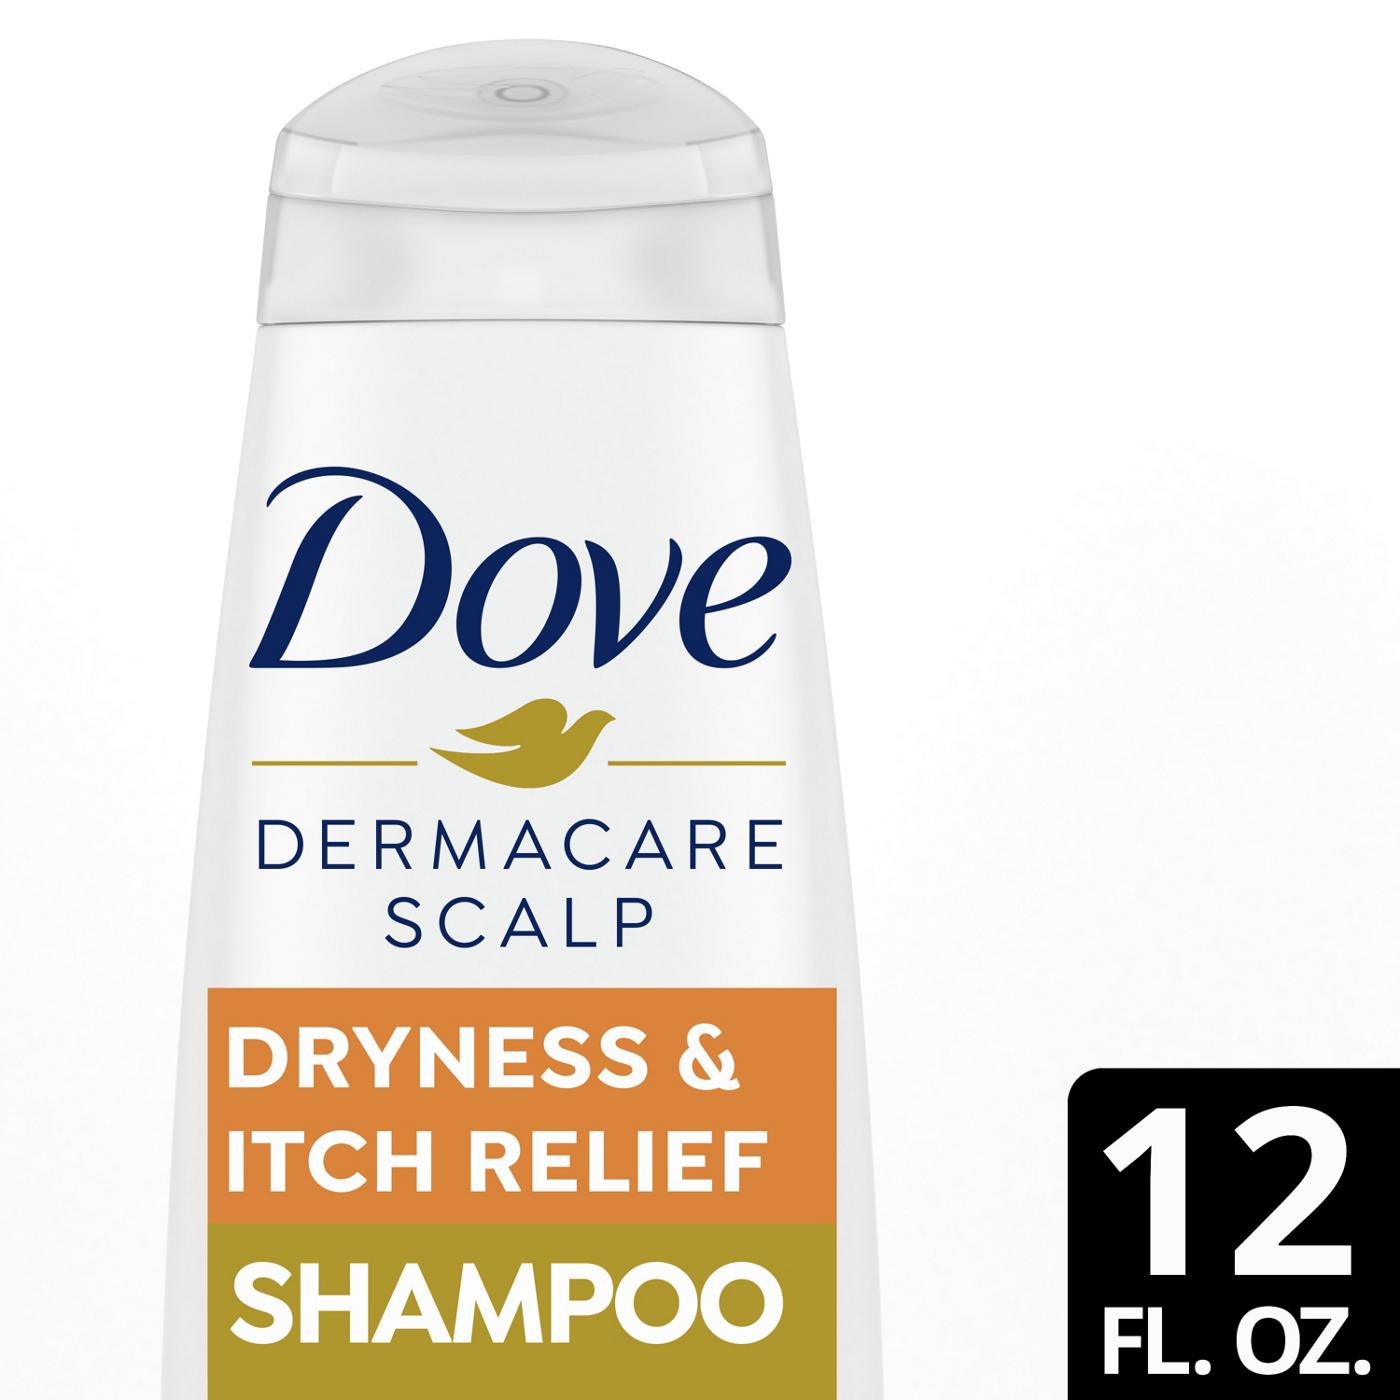 Dove DermaCare Scalp Anti-Dandruff Shampoo - Dryness & Itch Relief; image 3 of 5